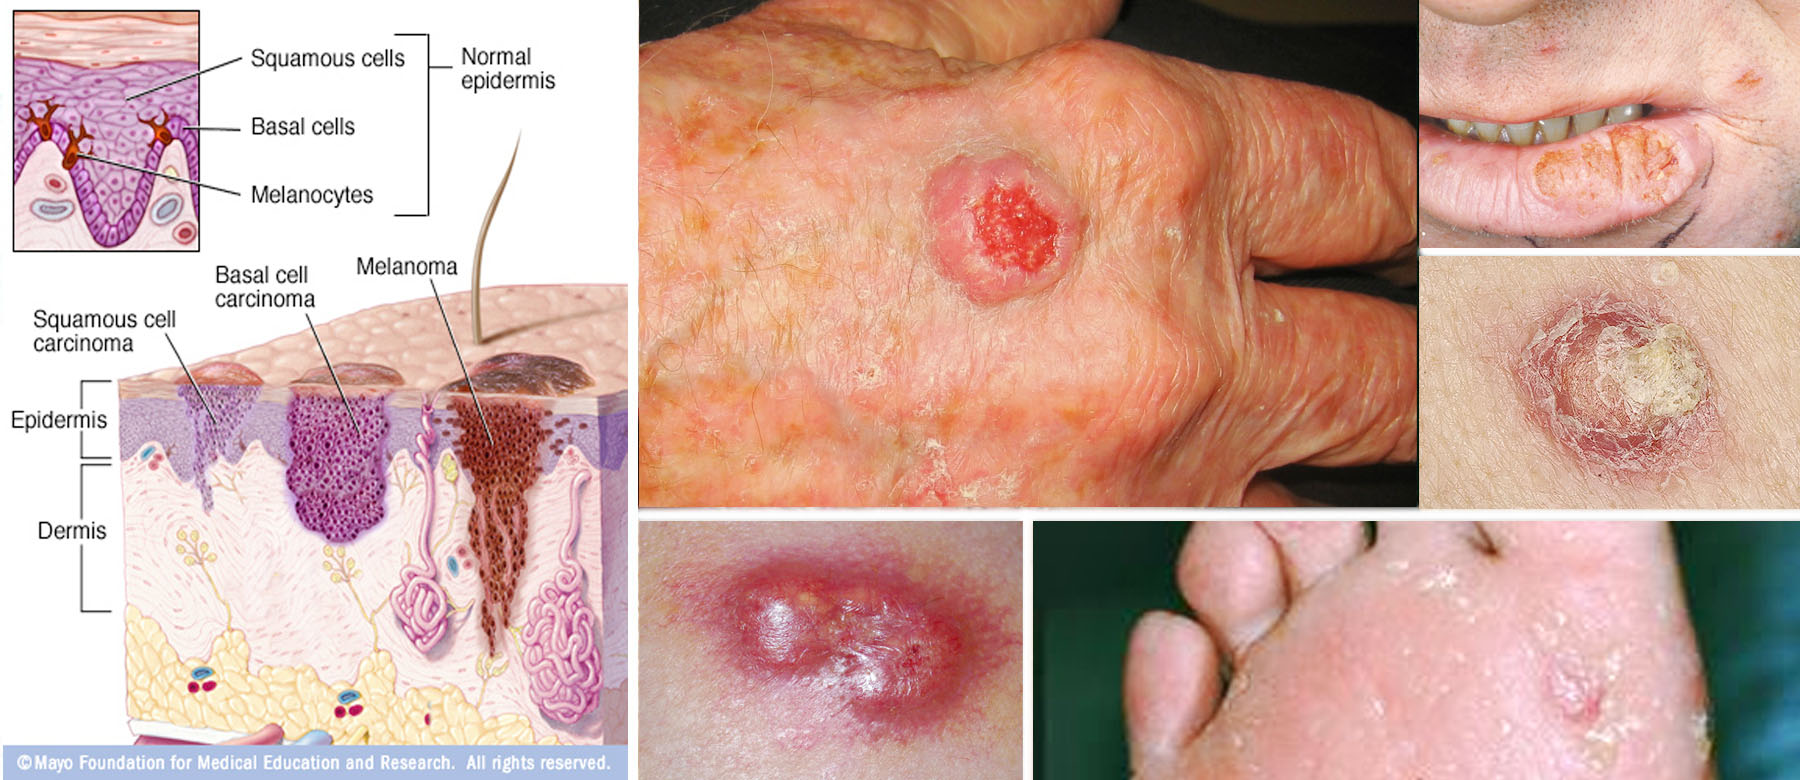 Squamous Cell Carcinoma of Skin. Symptoms and Treatment